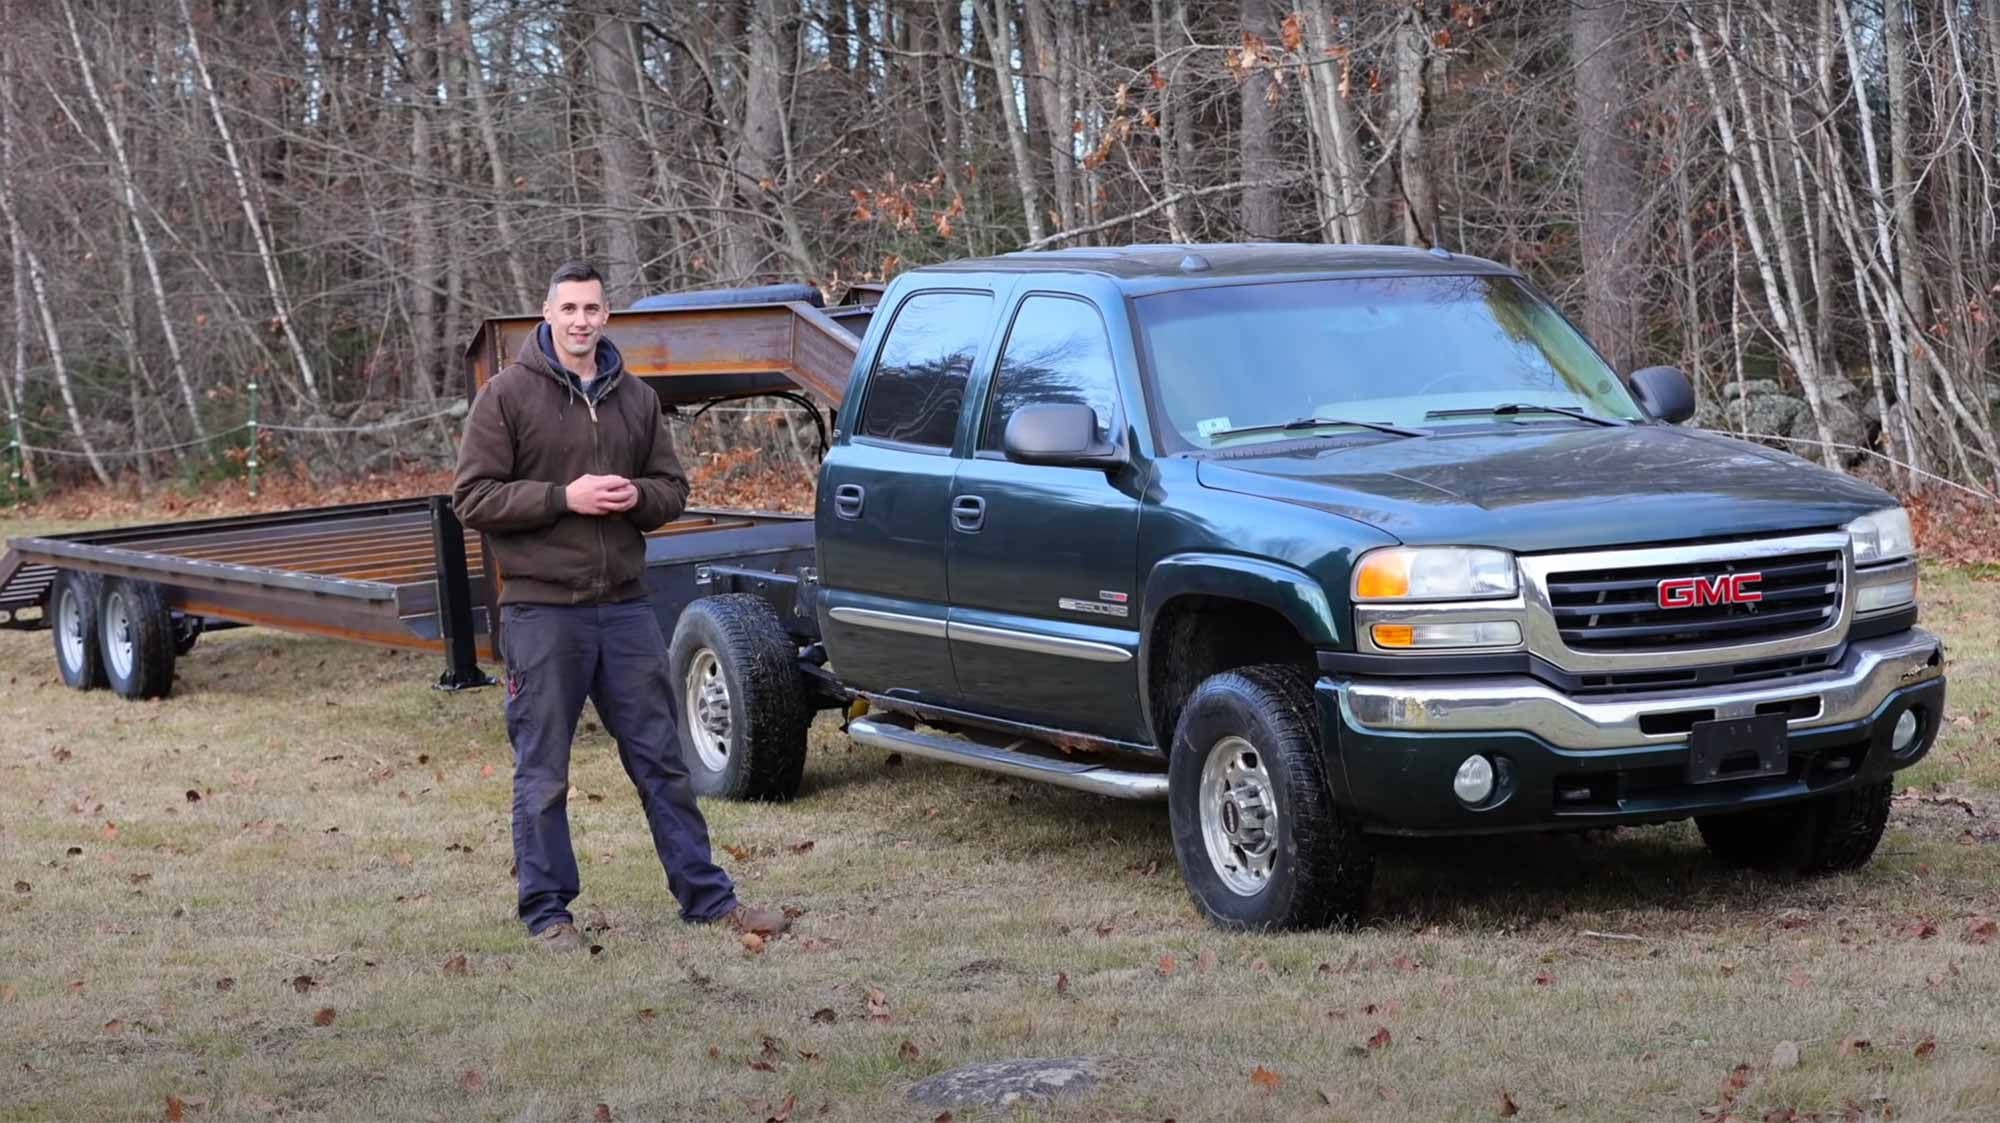 The latest video shows the trailer in near final form being tugged around by his new four-wheel-drive project truck dubbed Brandon.